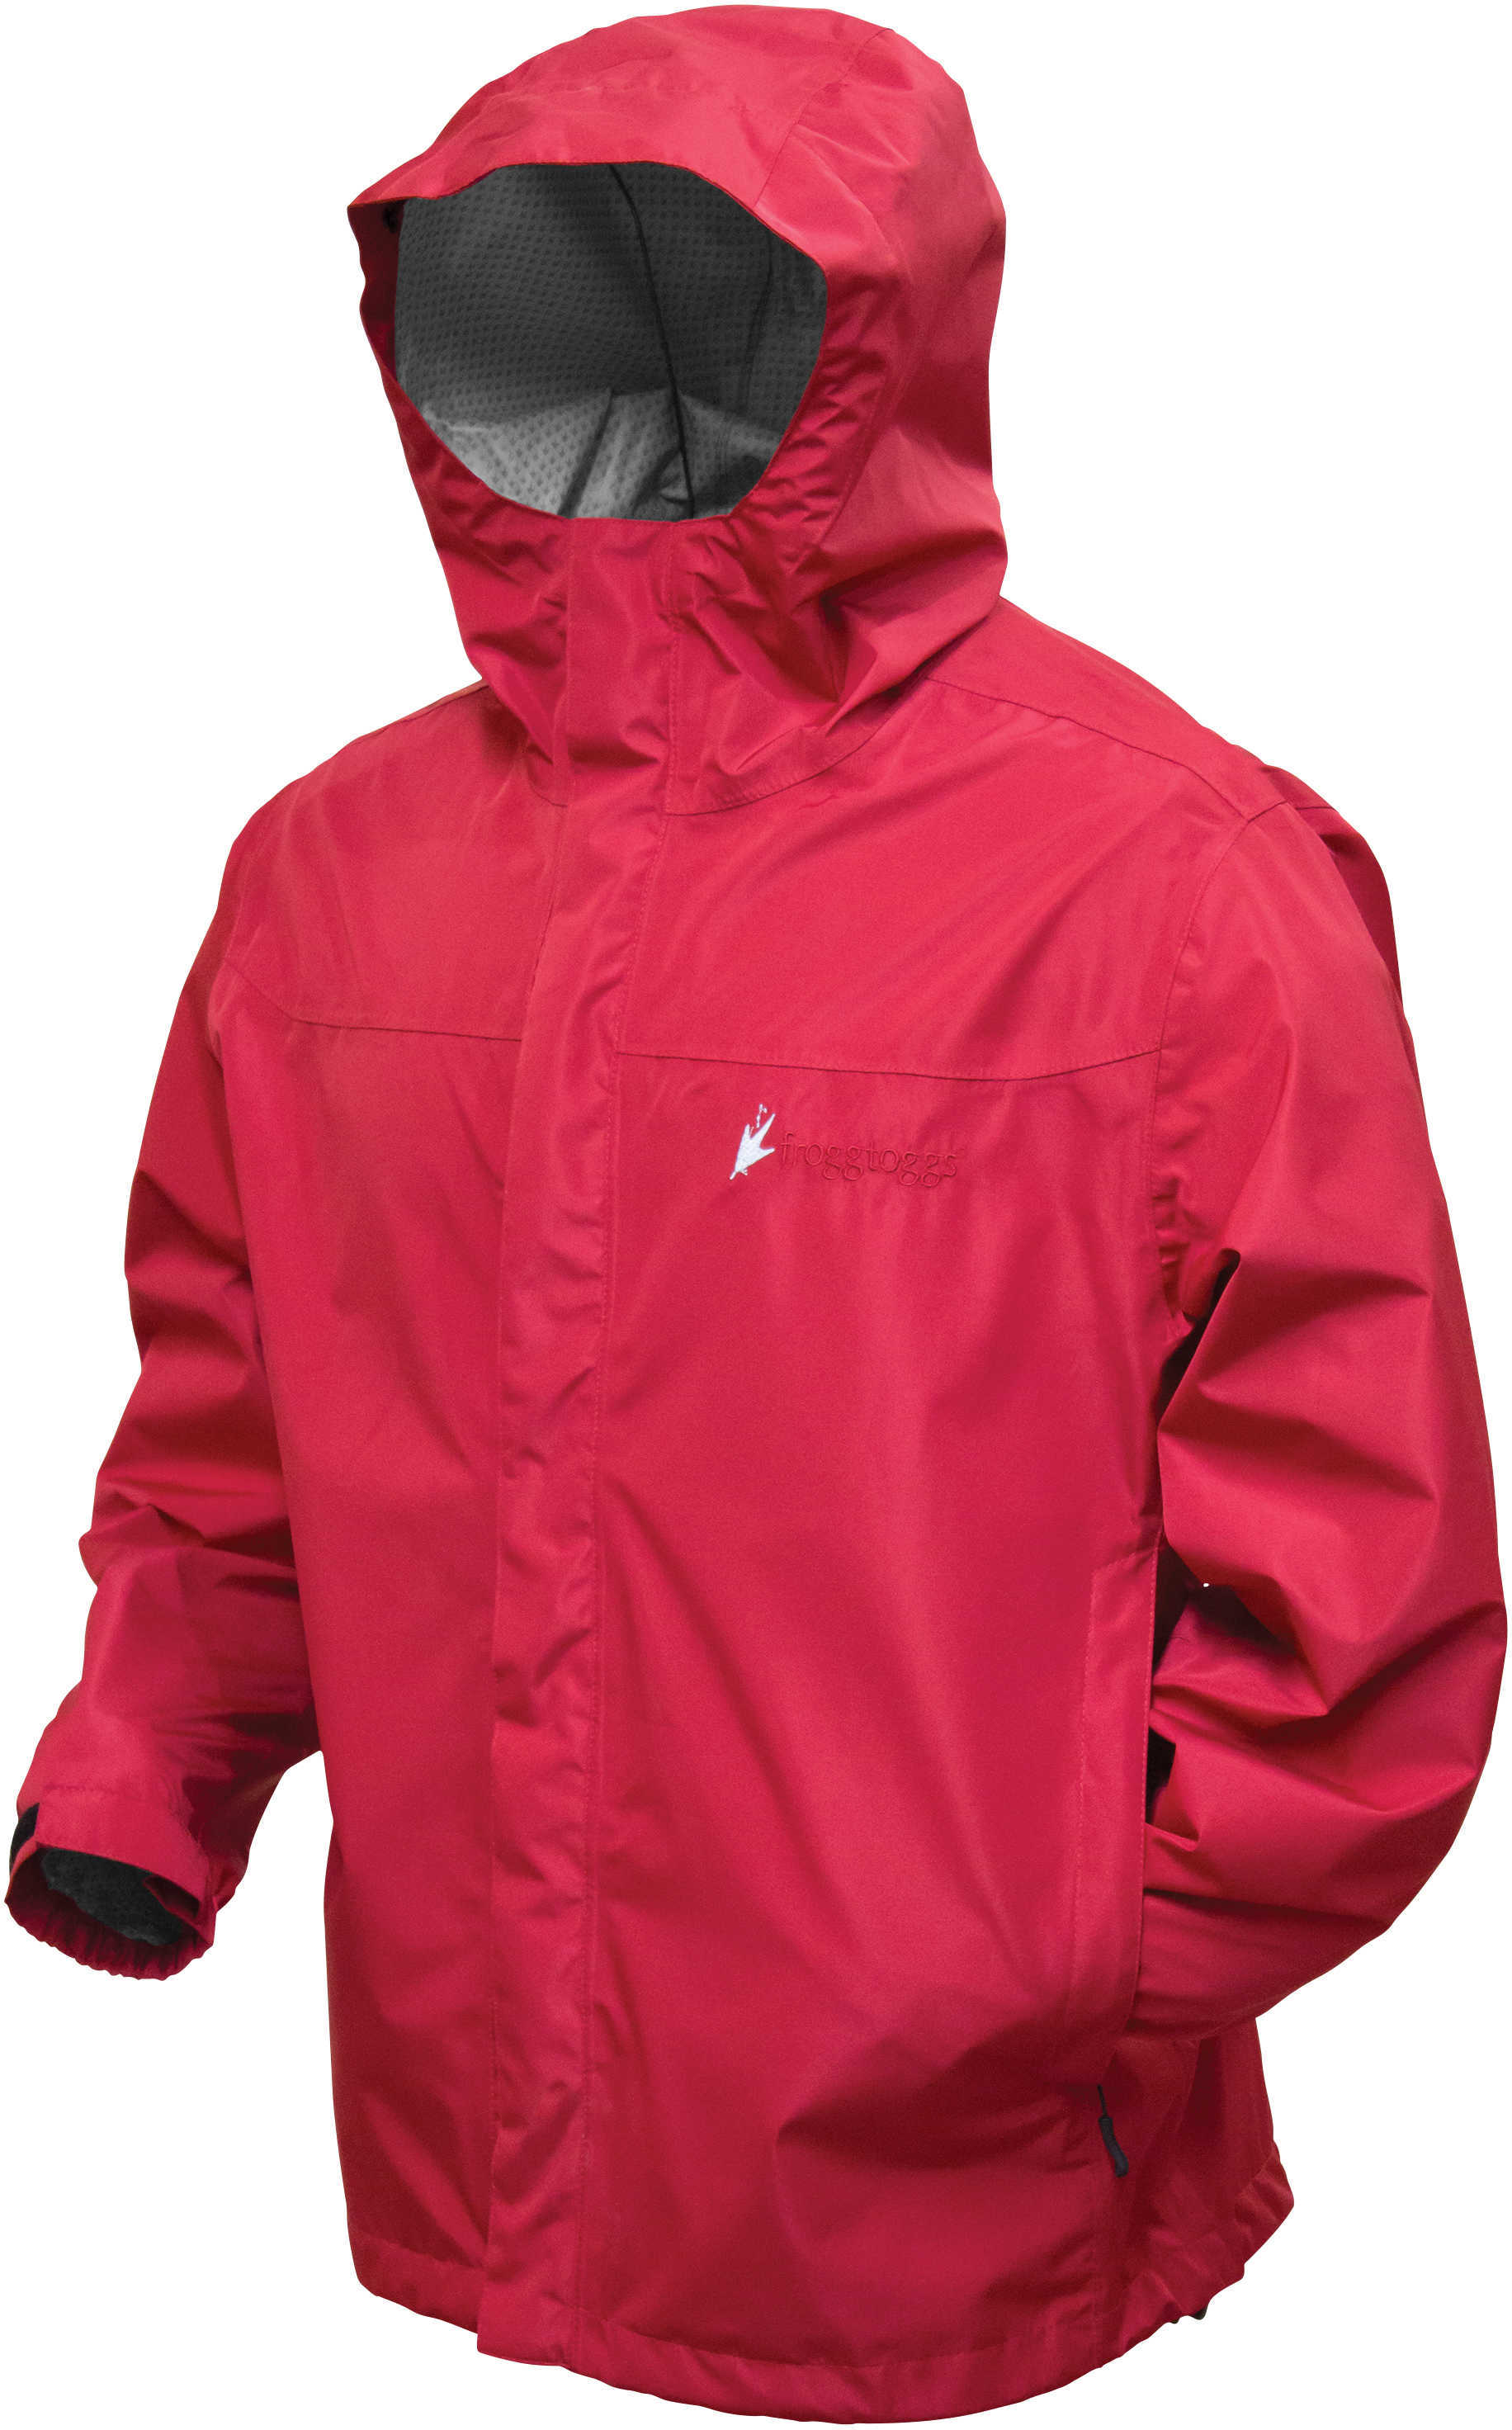 Frogg Toggs Java Toadz 2.5 Youth Jacket Red, Small Md: JT62330-10SM